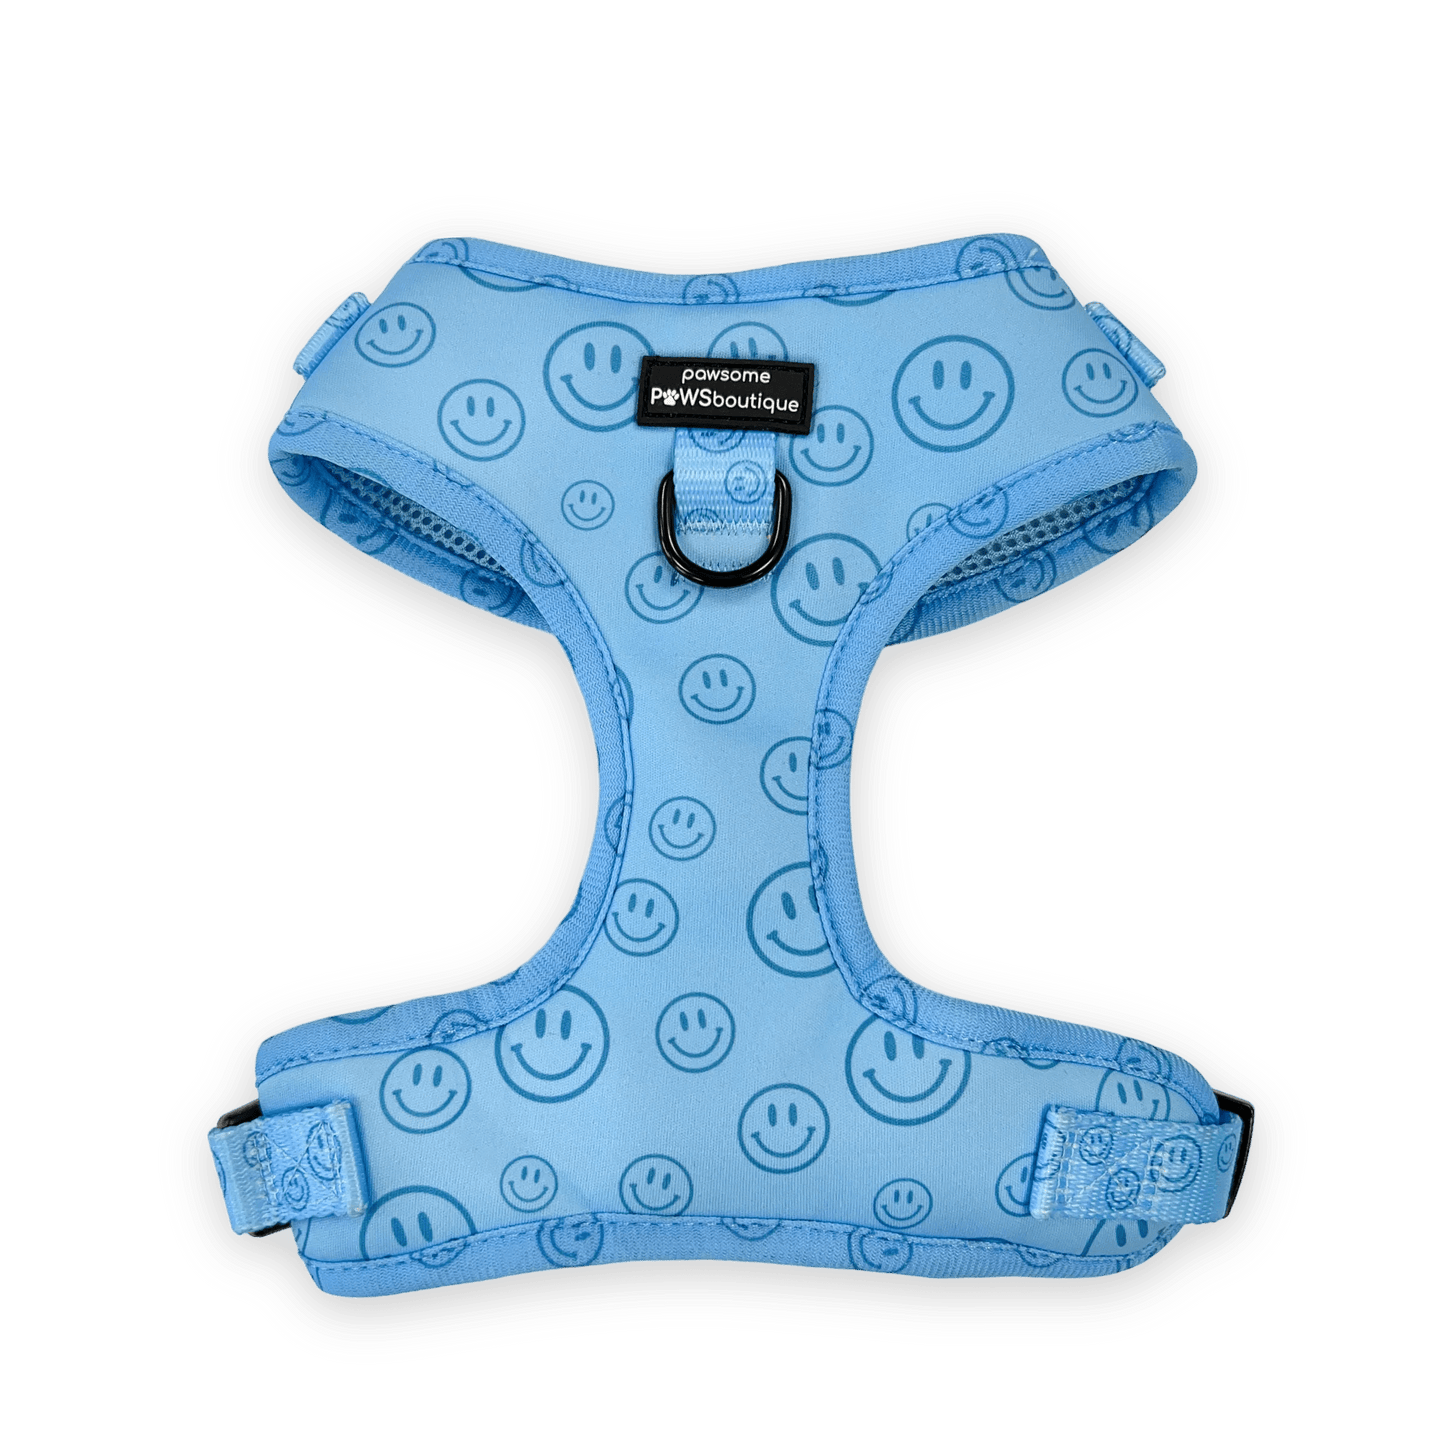 Pawsome Paws Boutique Harness No Blue Mood - No Pull Adjustable Dog Harness